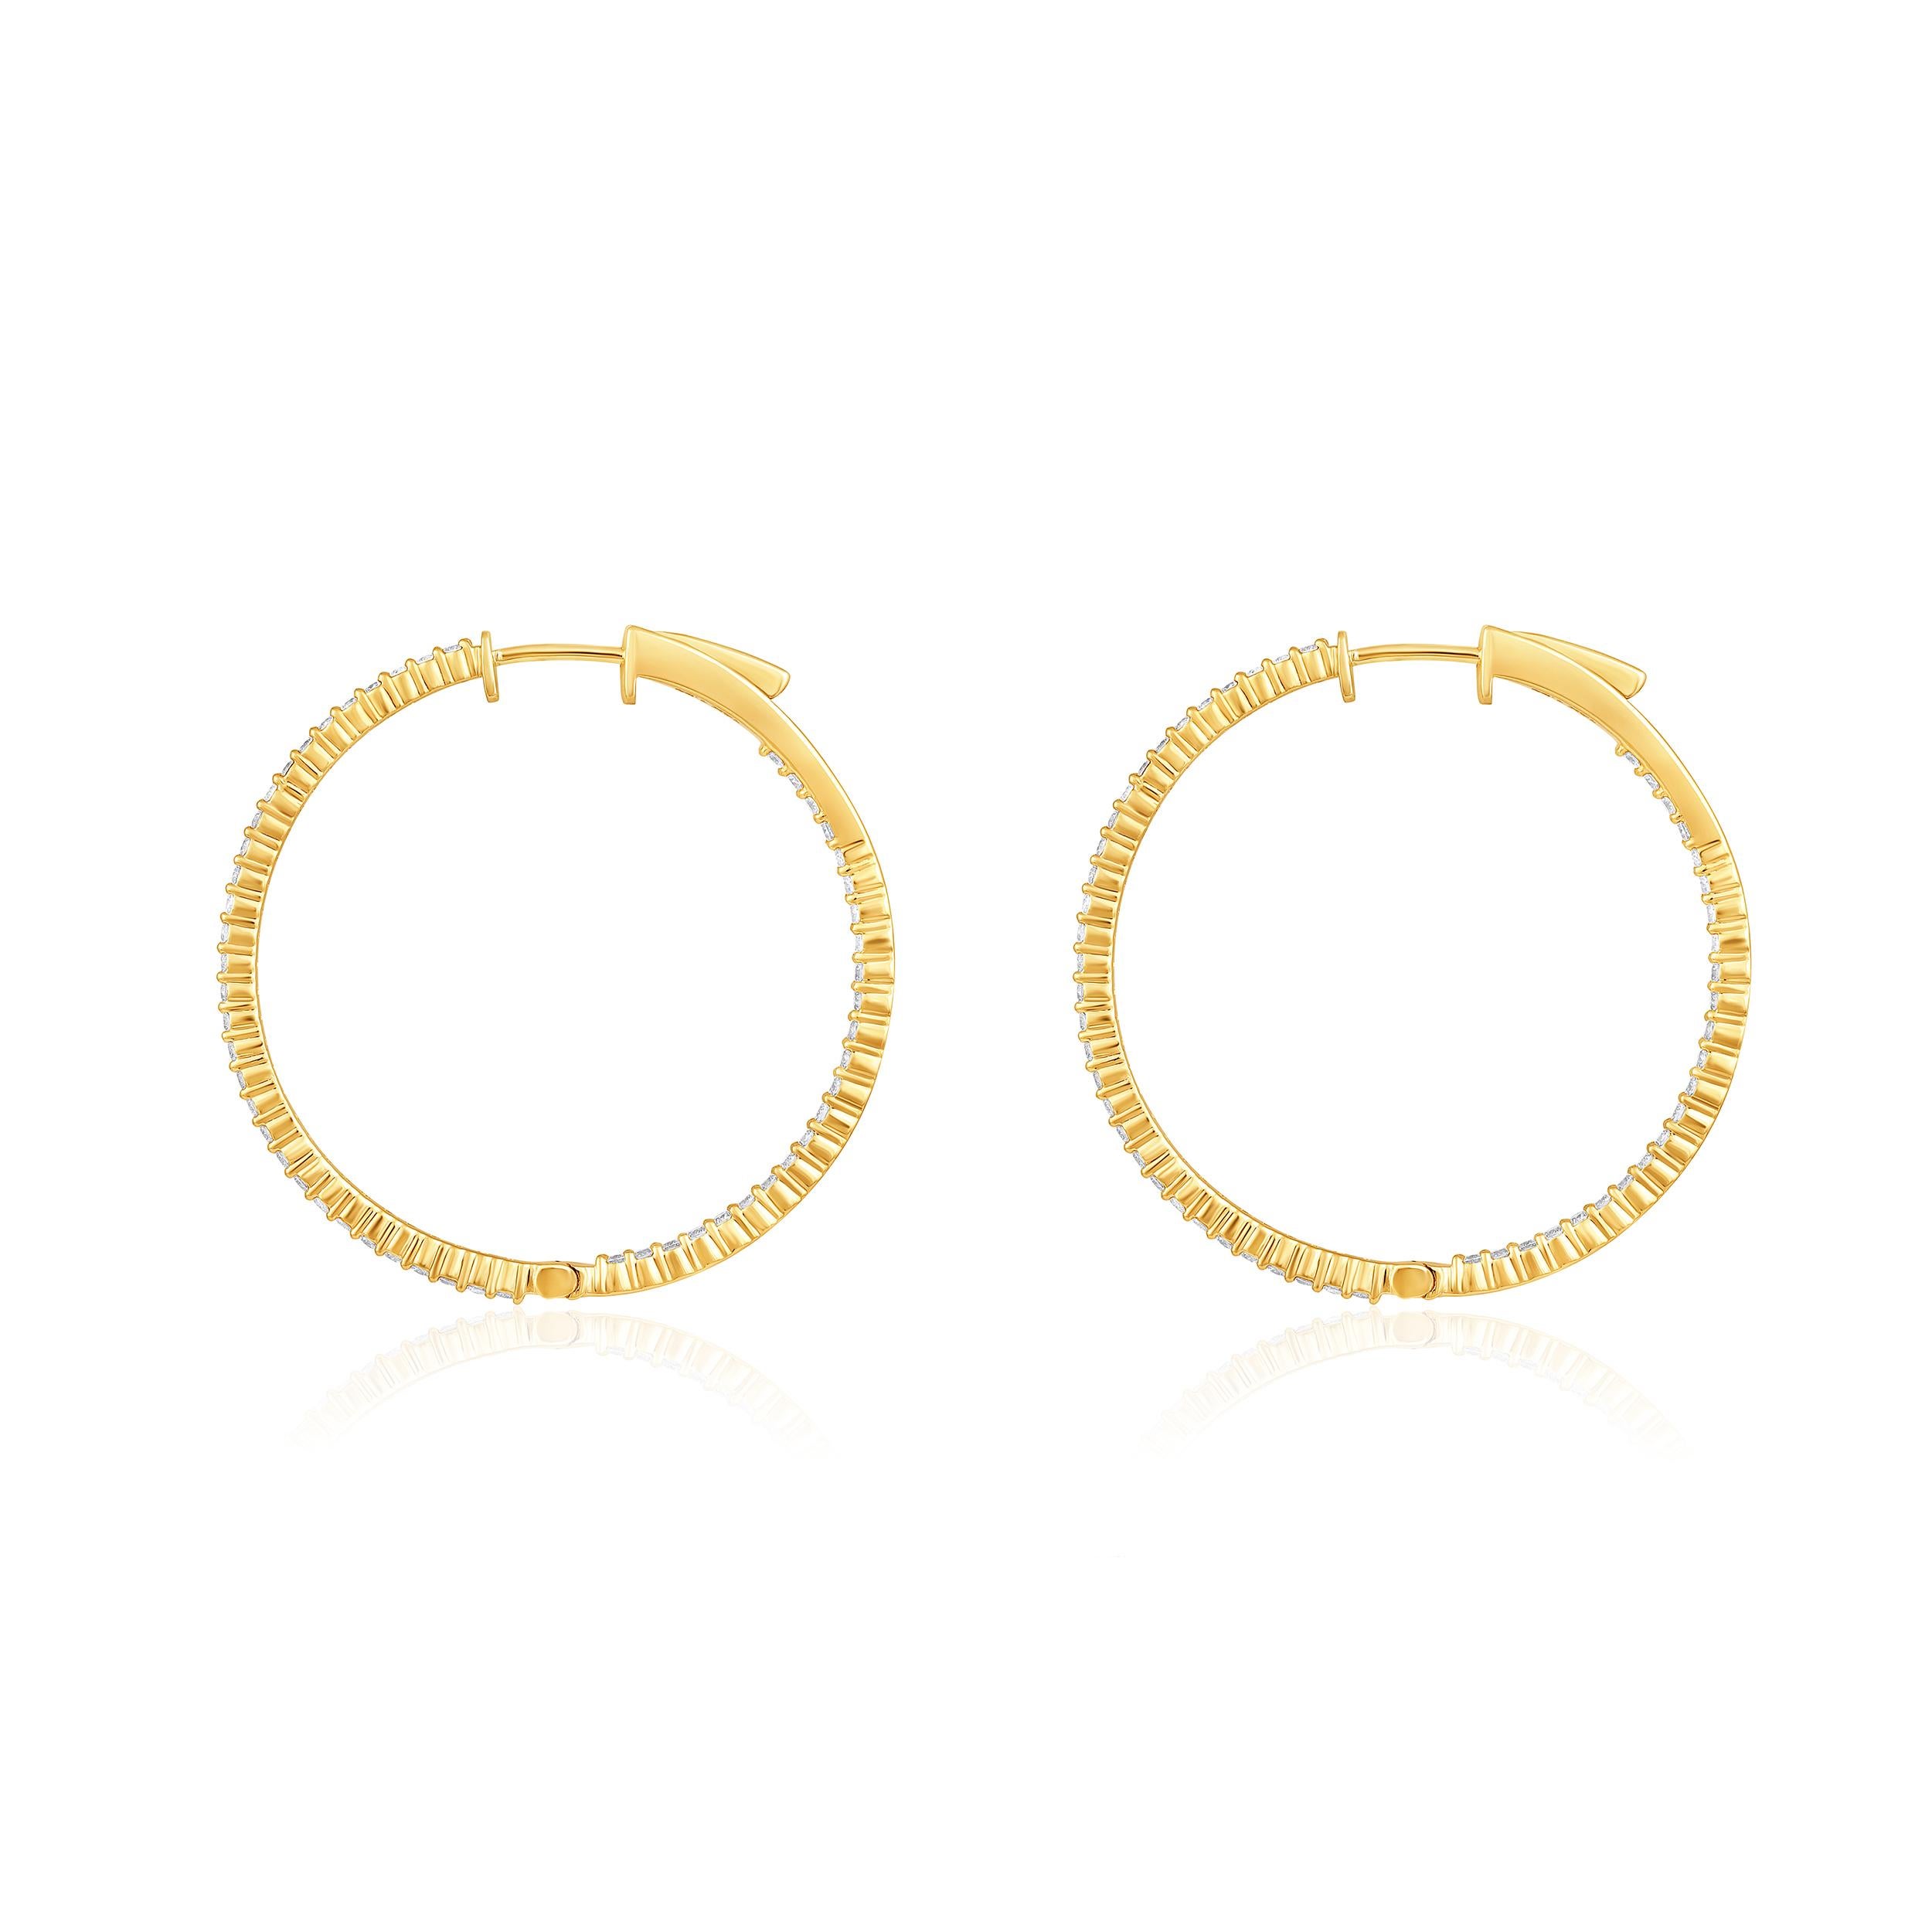 Brilliant Cut Certified 14k Gold 1.35 Carat Natural Diamond Round Inside Out Hoop Earrings For Sale